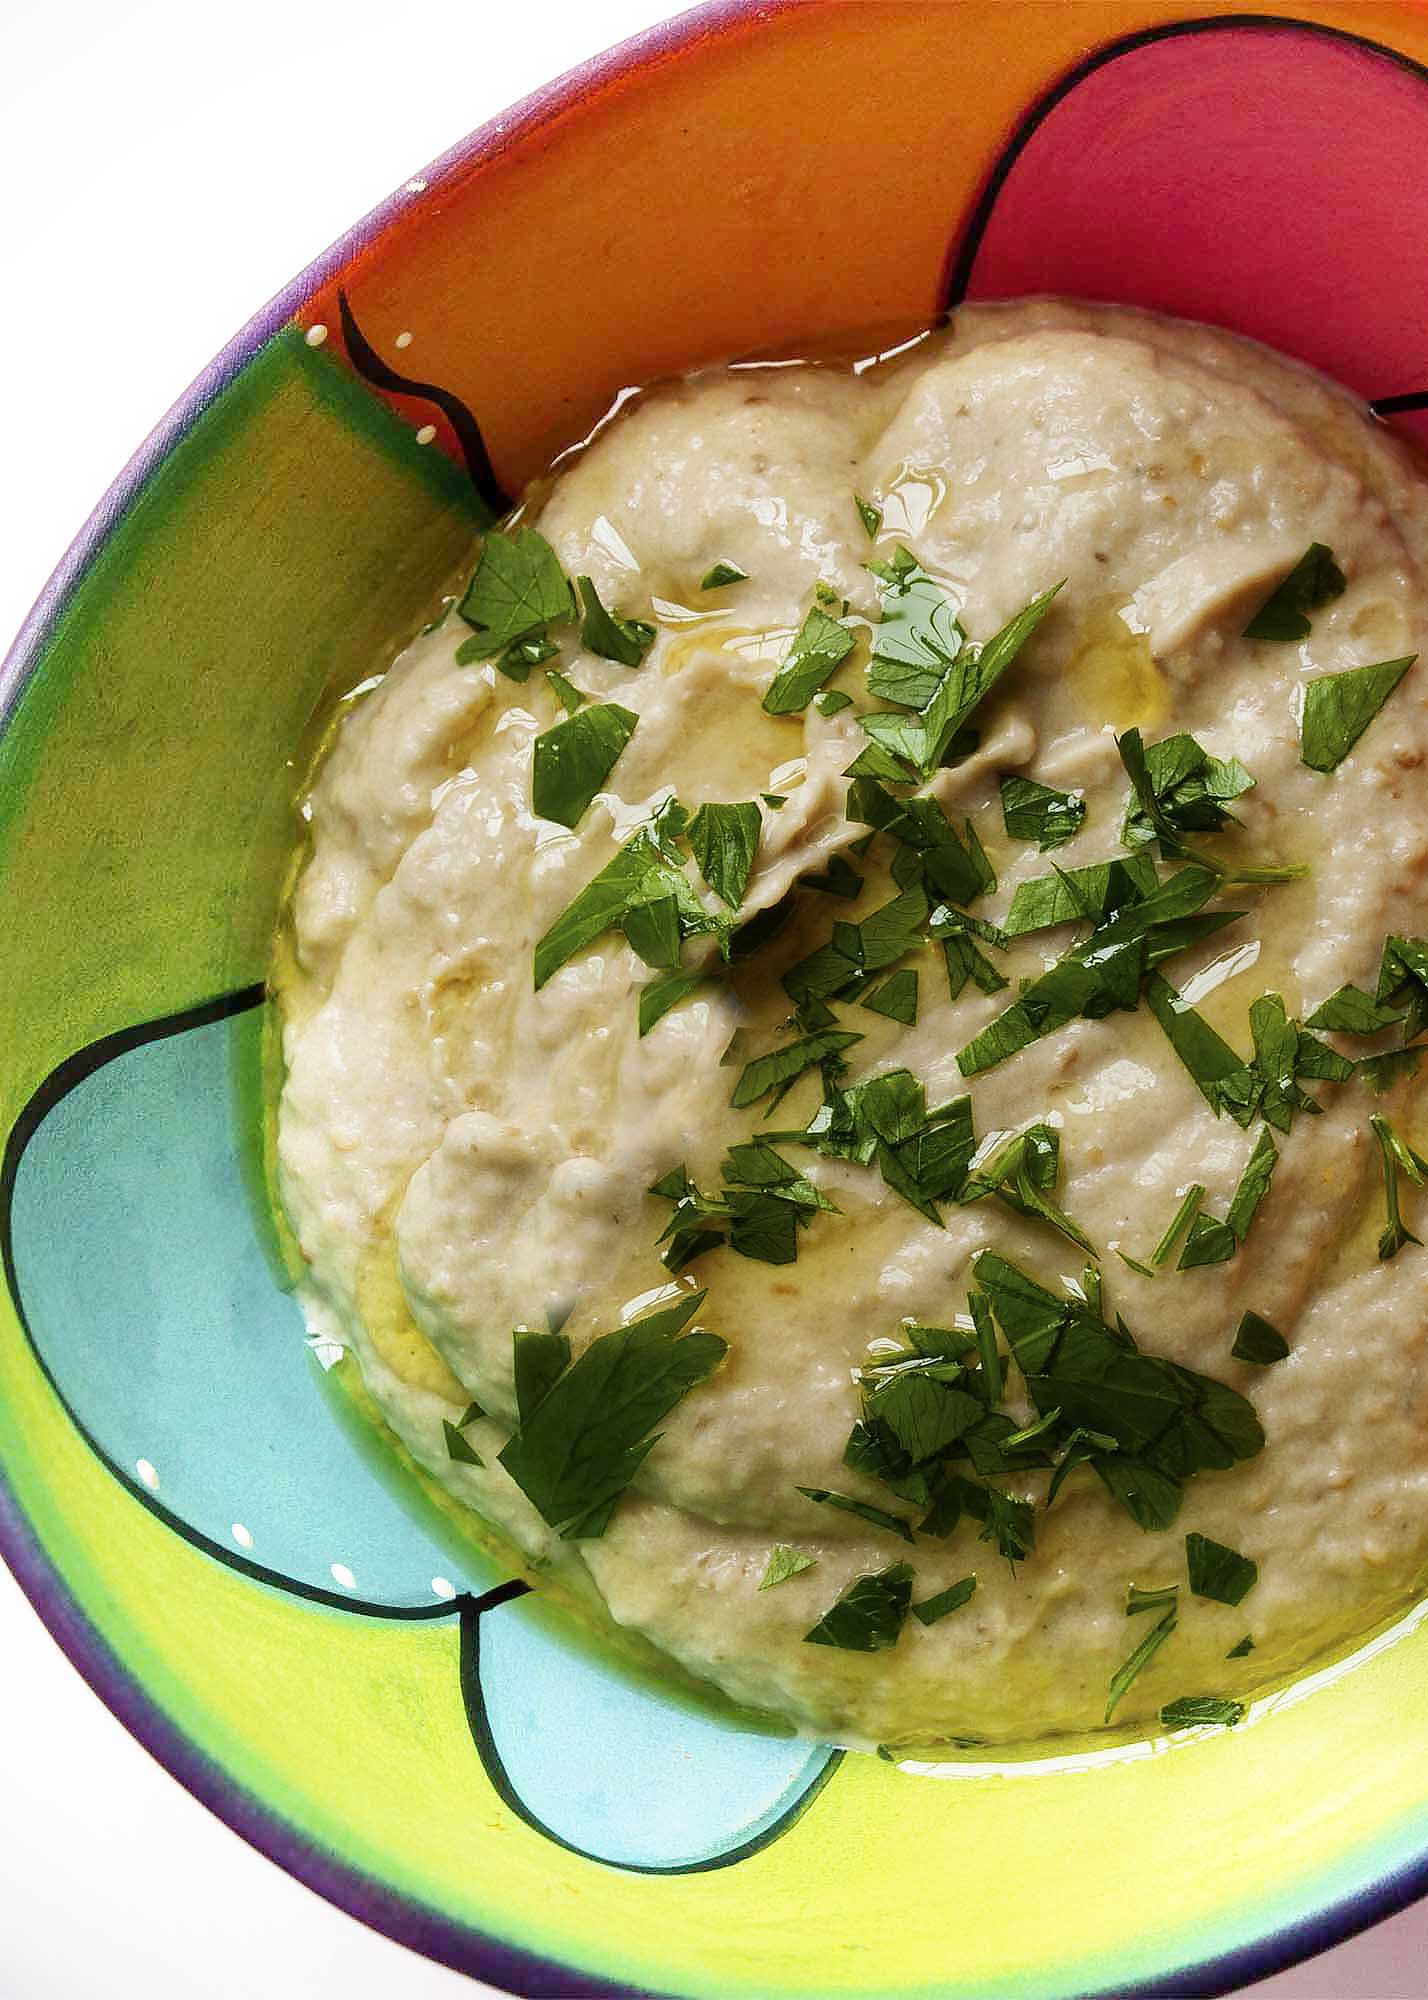 Baba Ghanoush - This creamy, smoky eggplant dip lightened with a bit of mayonnaise will have you going back for more. | justalittlebitofbacon.com